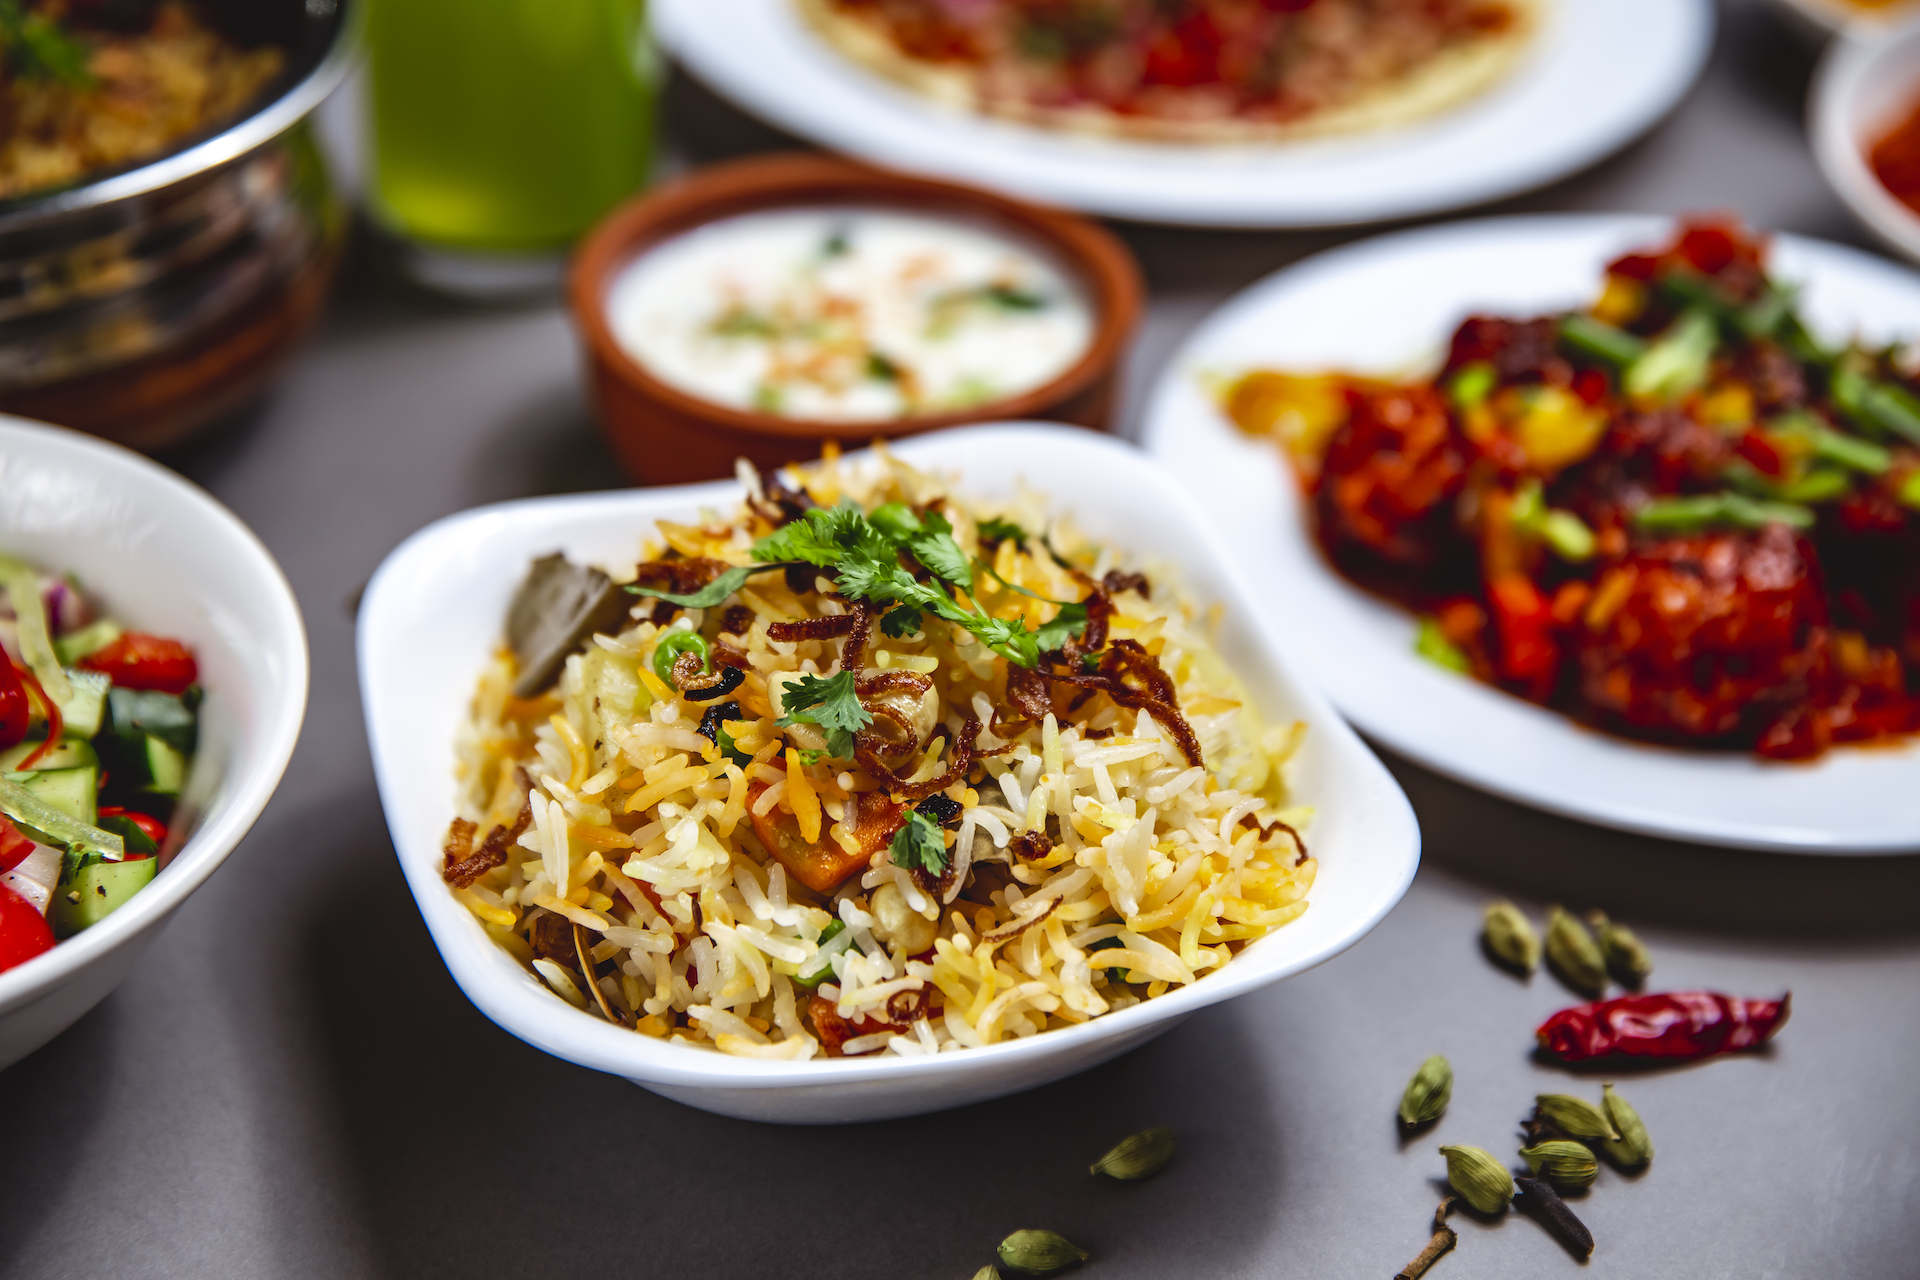 We serve the best Biriyani ever, which makes you drool! 